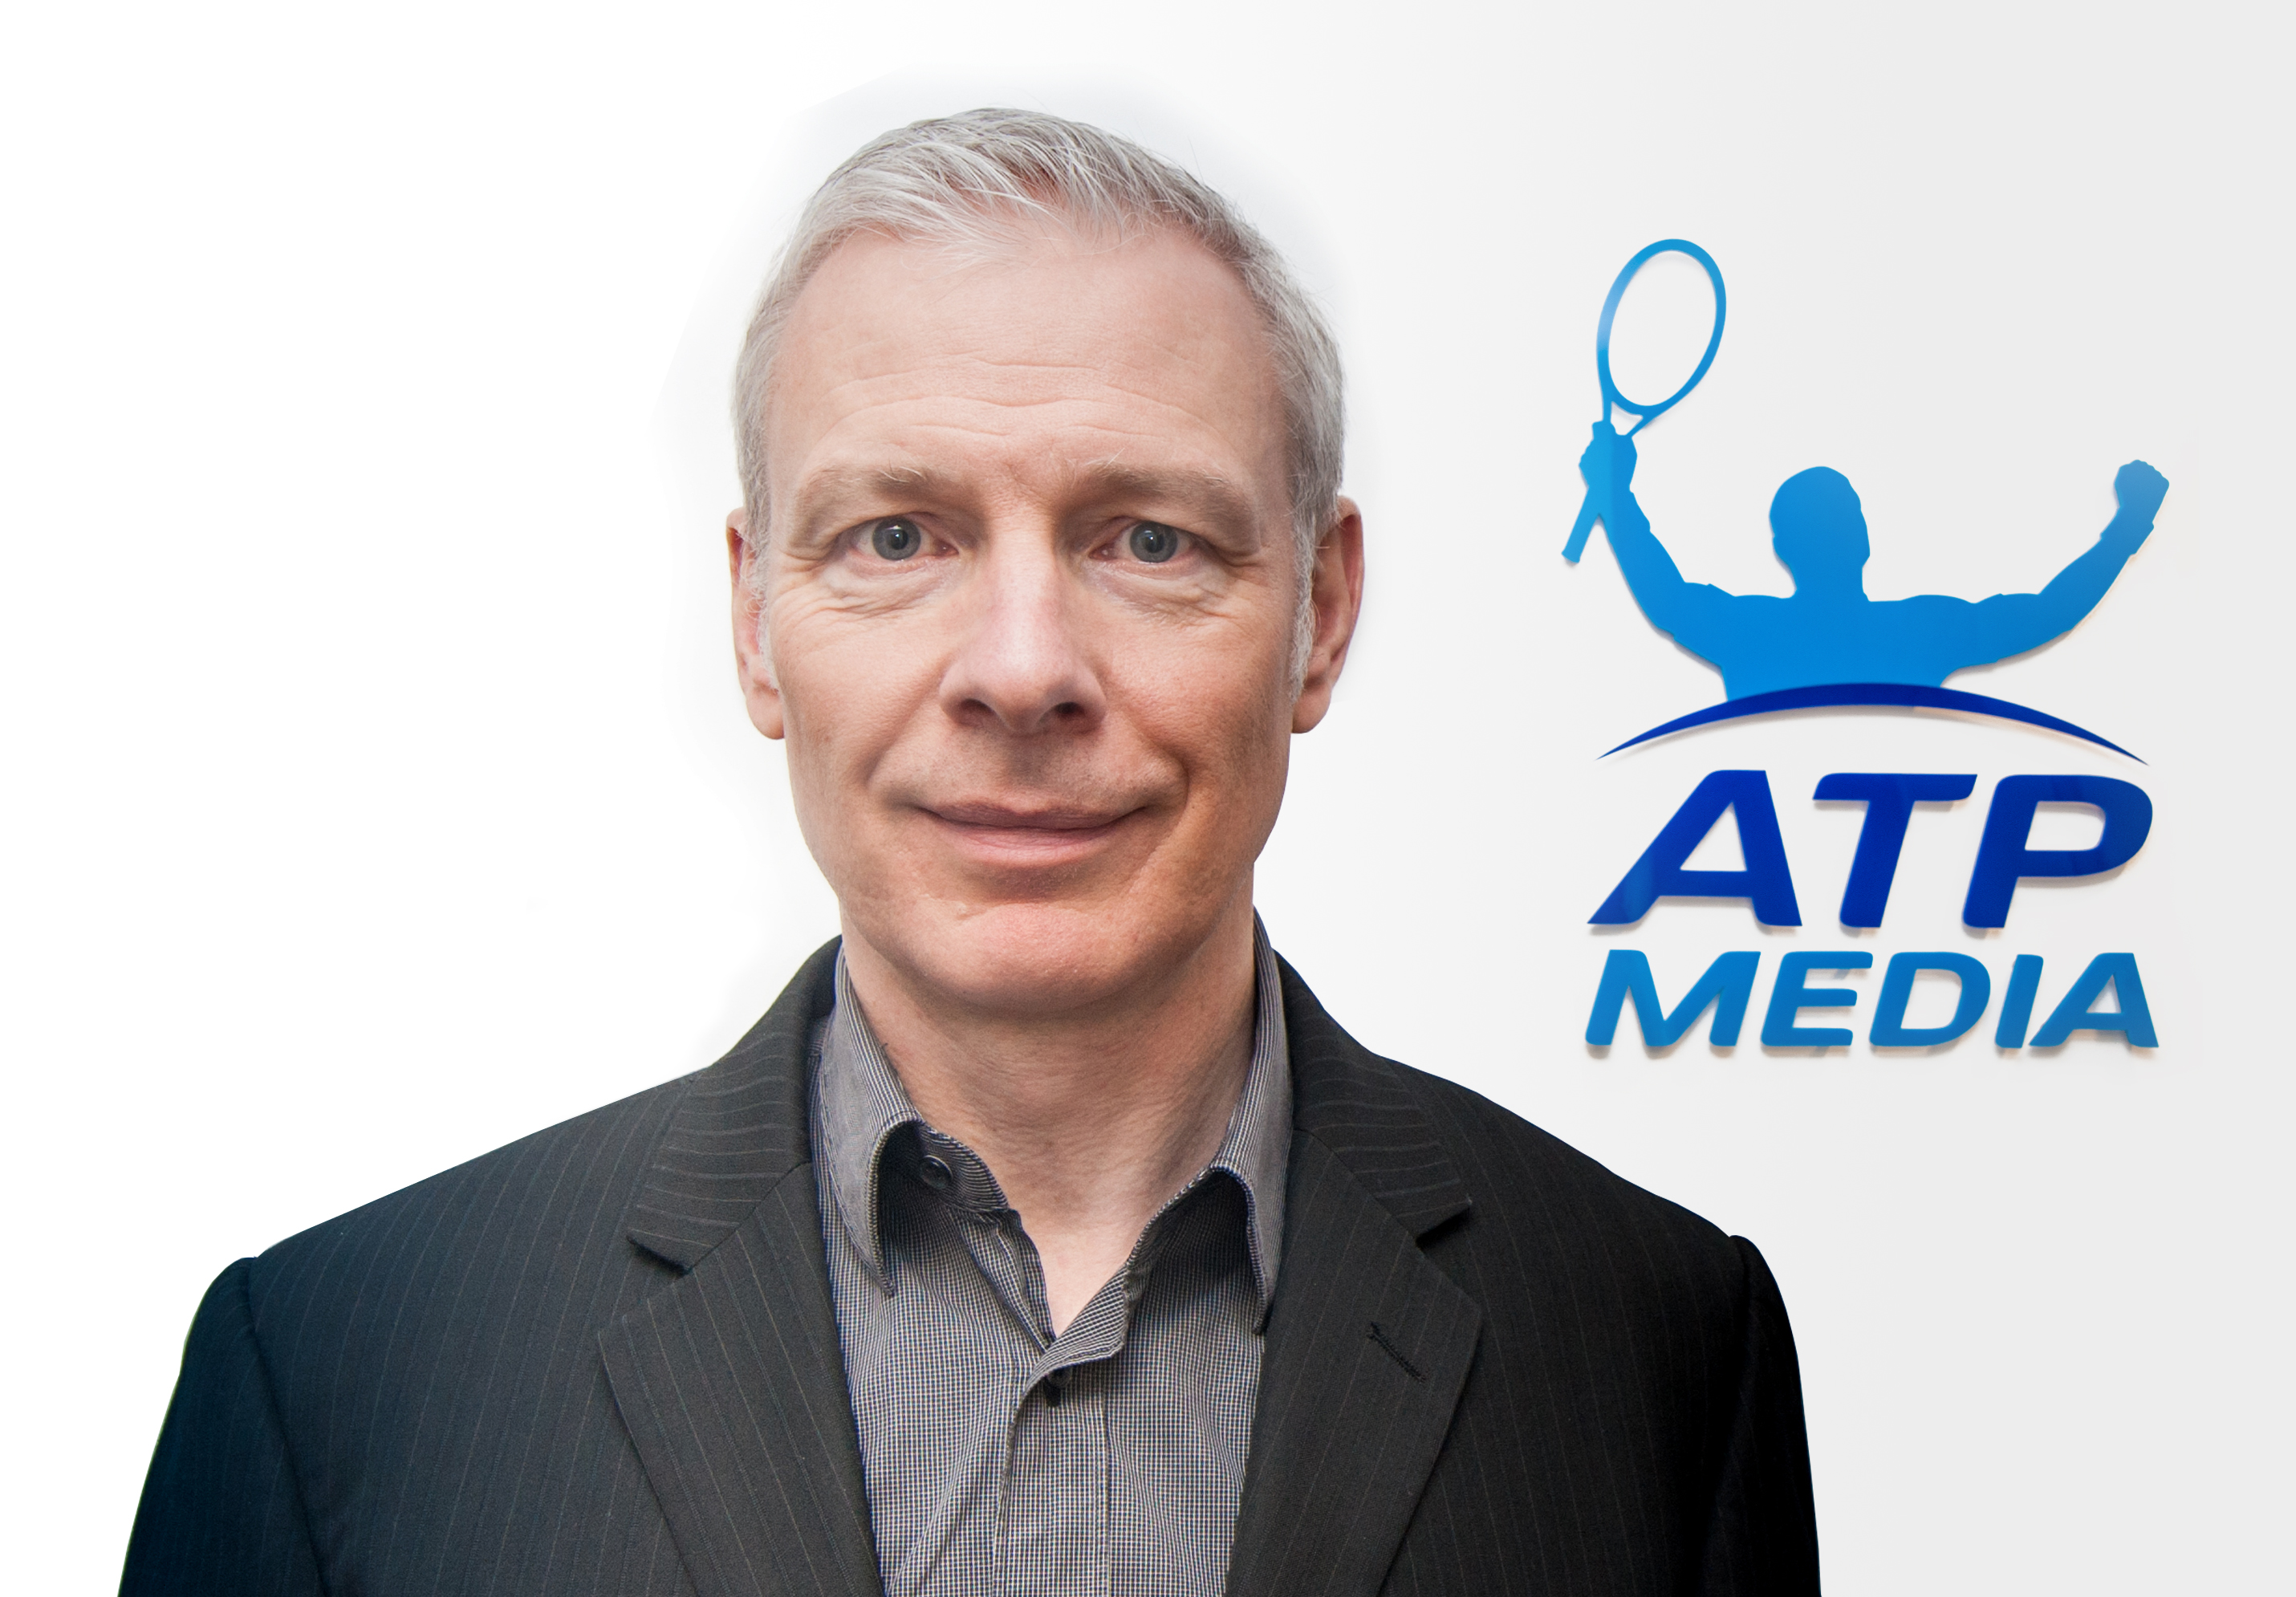 Live From the ATP World Tour Finals ATP Media discusses new camera positions, fibre connectivity and Broadcaster Portal innovation